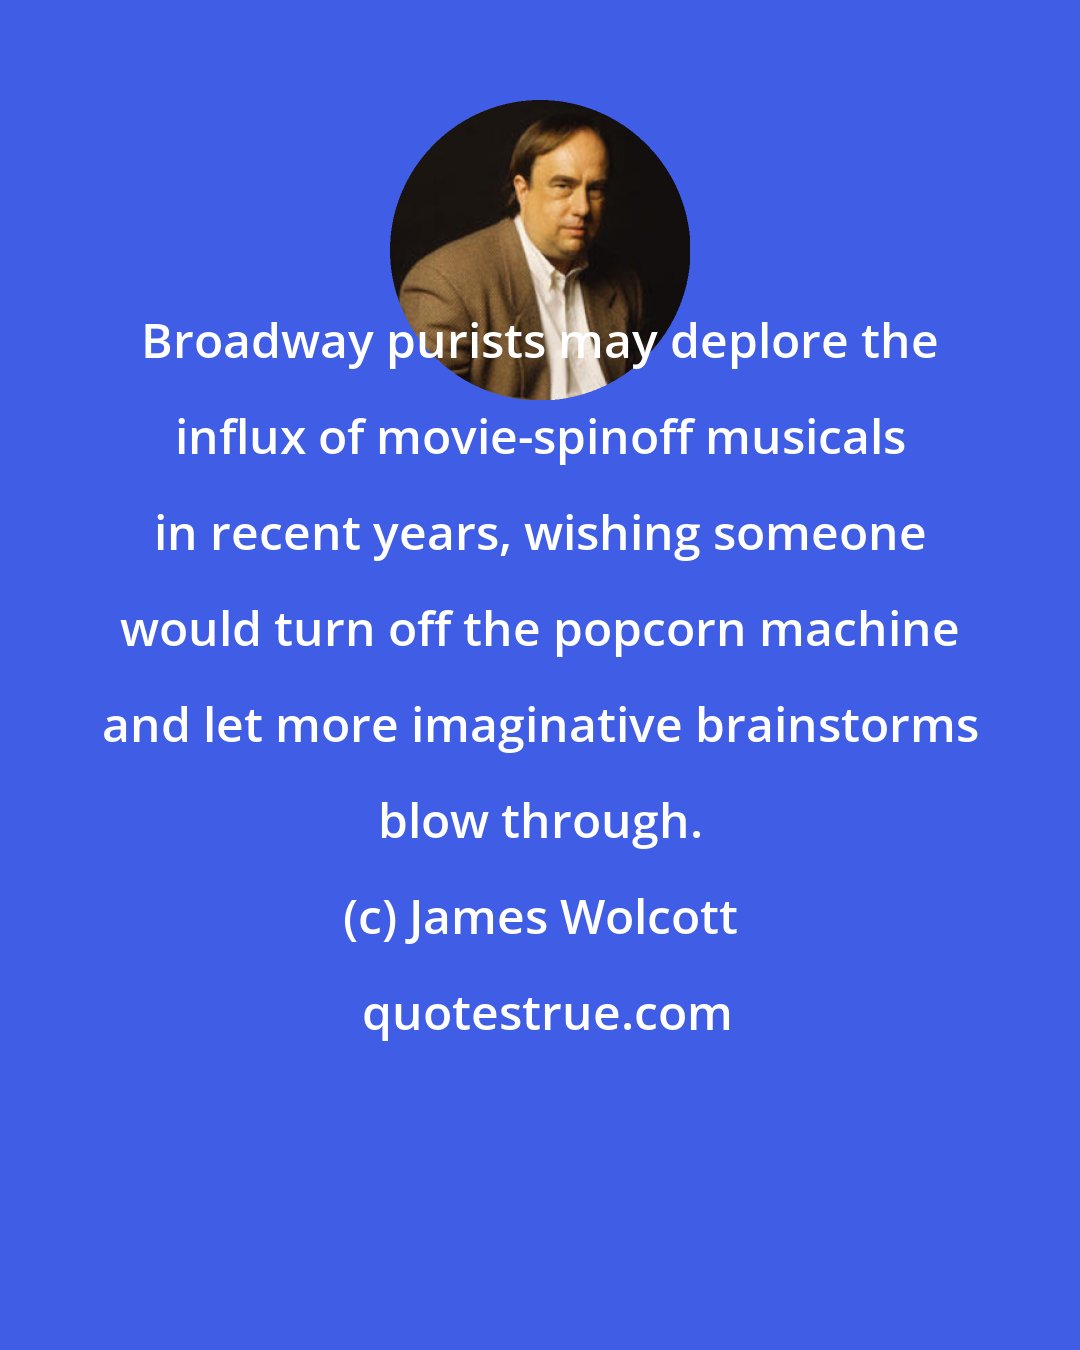 James Wolcott: Broadway purists may deplore the influx of movie-spinoff musicals in recent years, wishing someone would turn off the popcorn machine and let more imaginative brainstorms blow through.